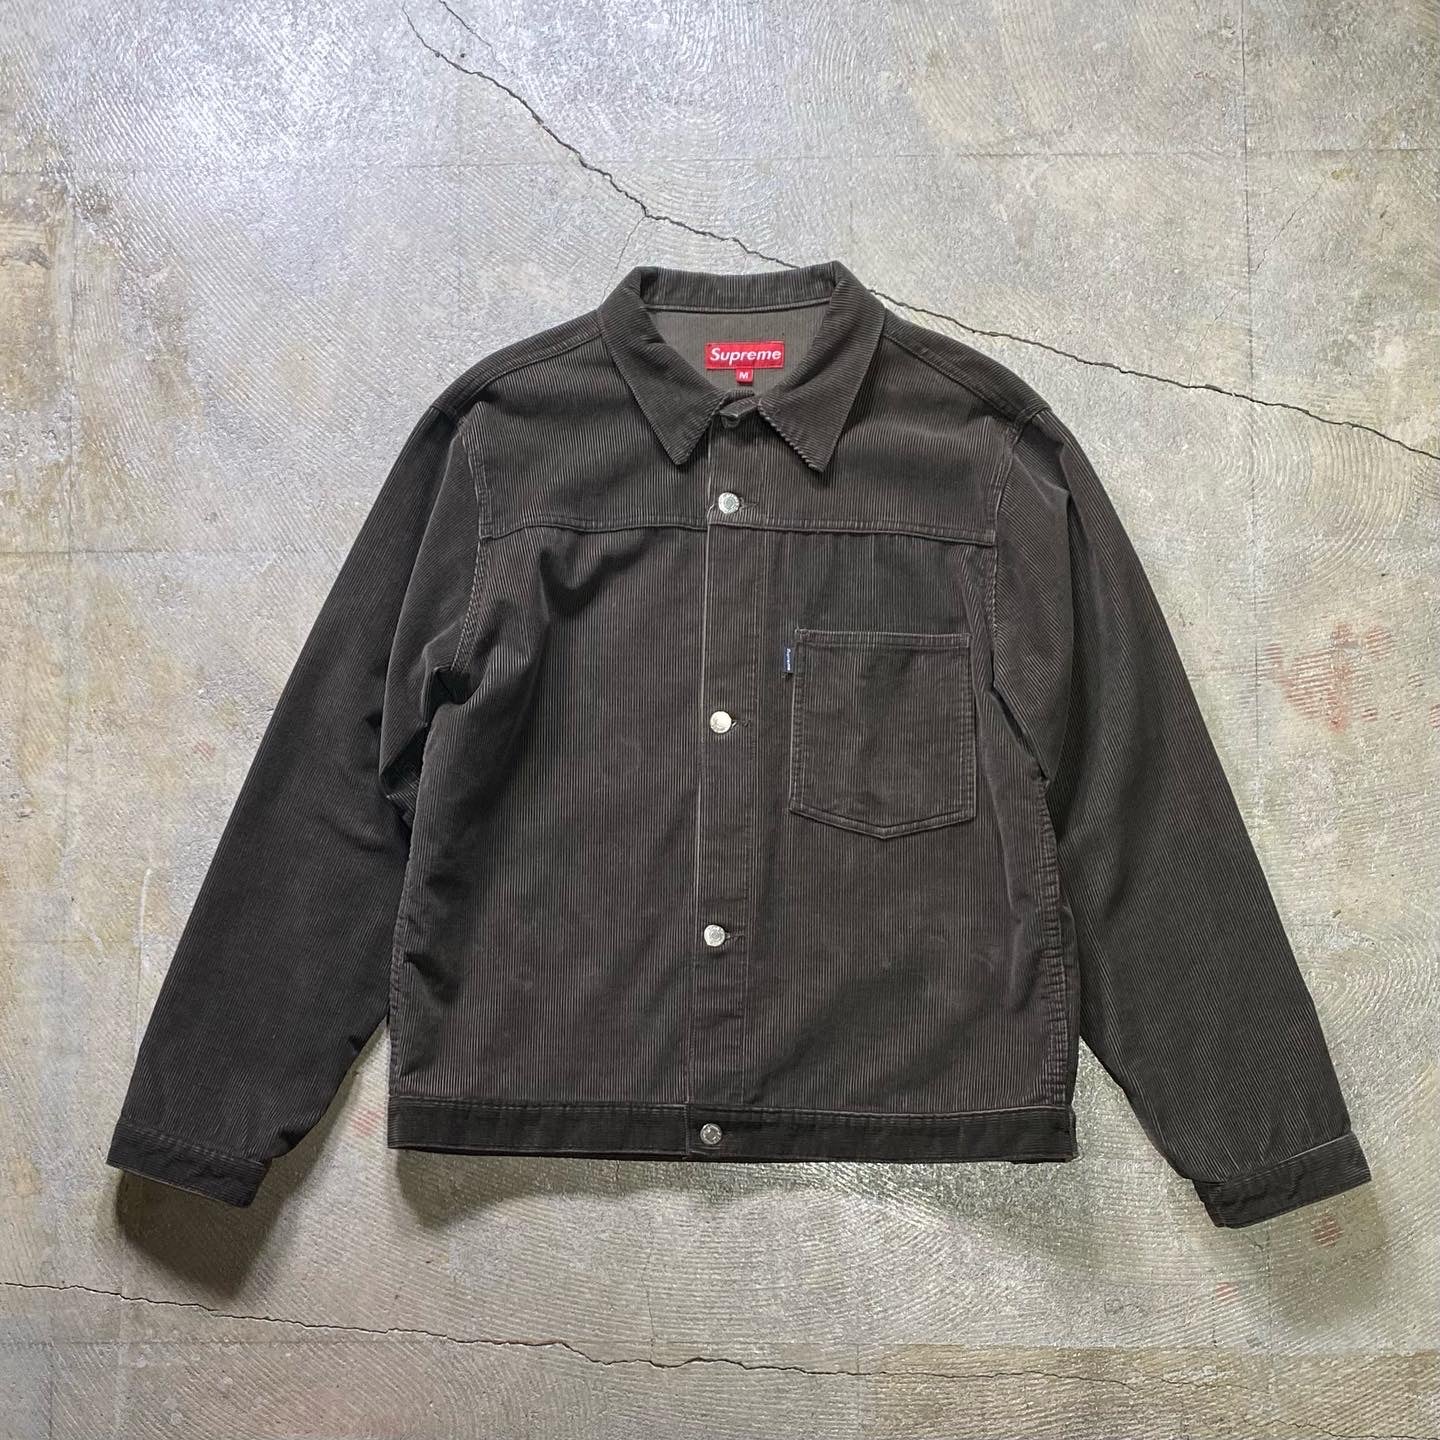 Old Supreme Corduroy Jacket 1st Type (GOOD CONDITION / size M)